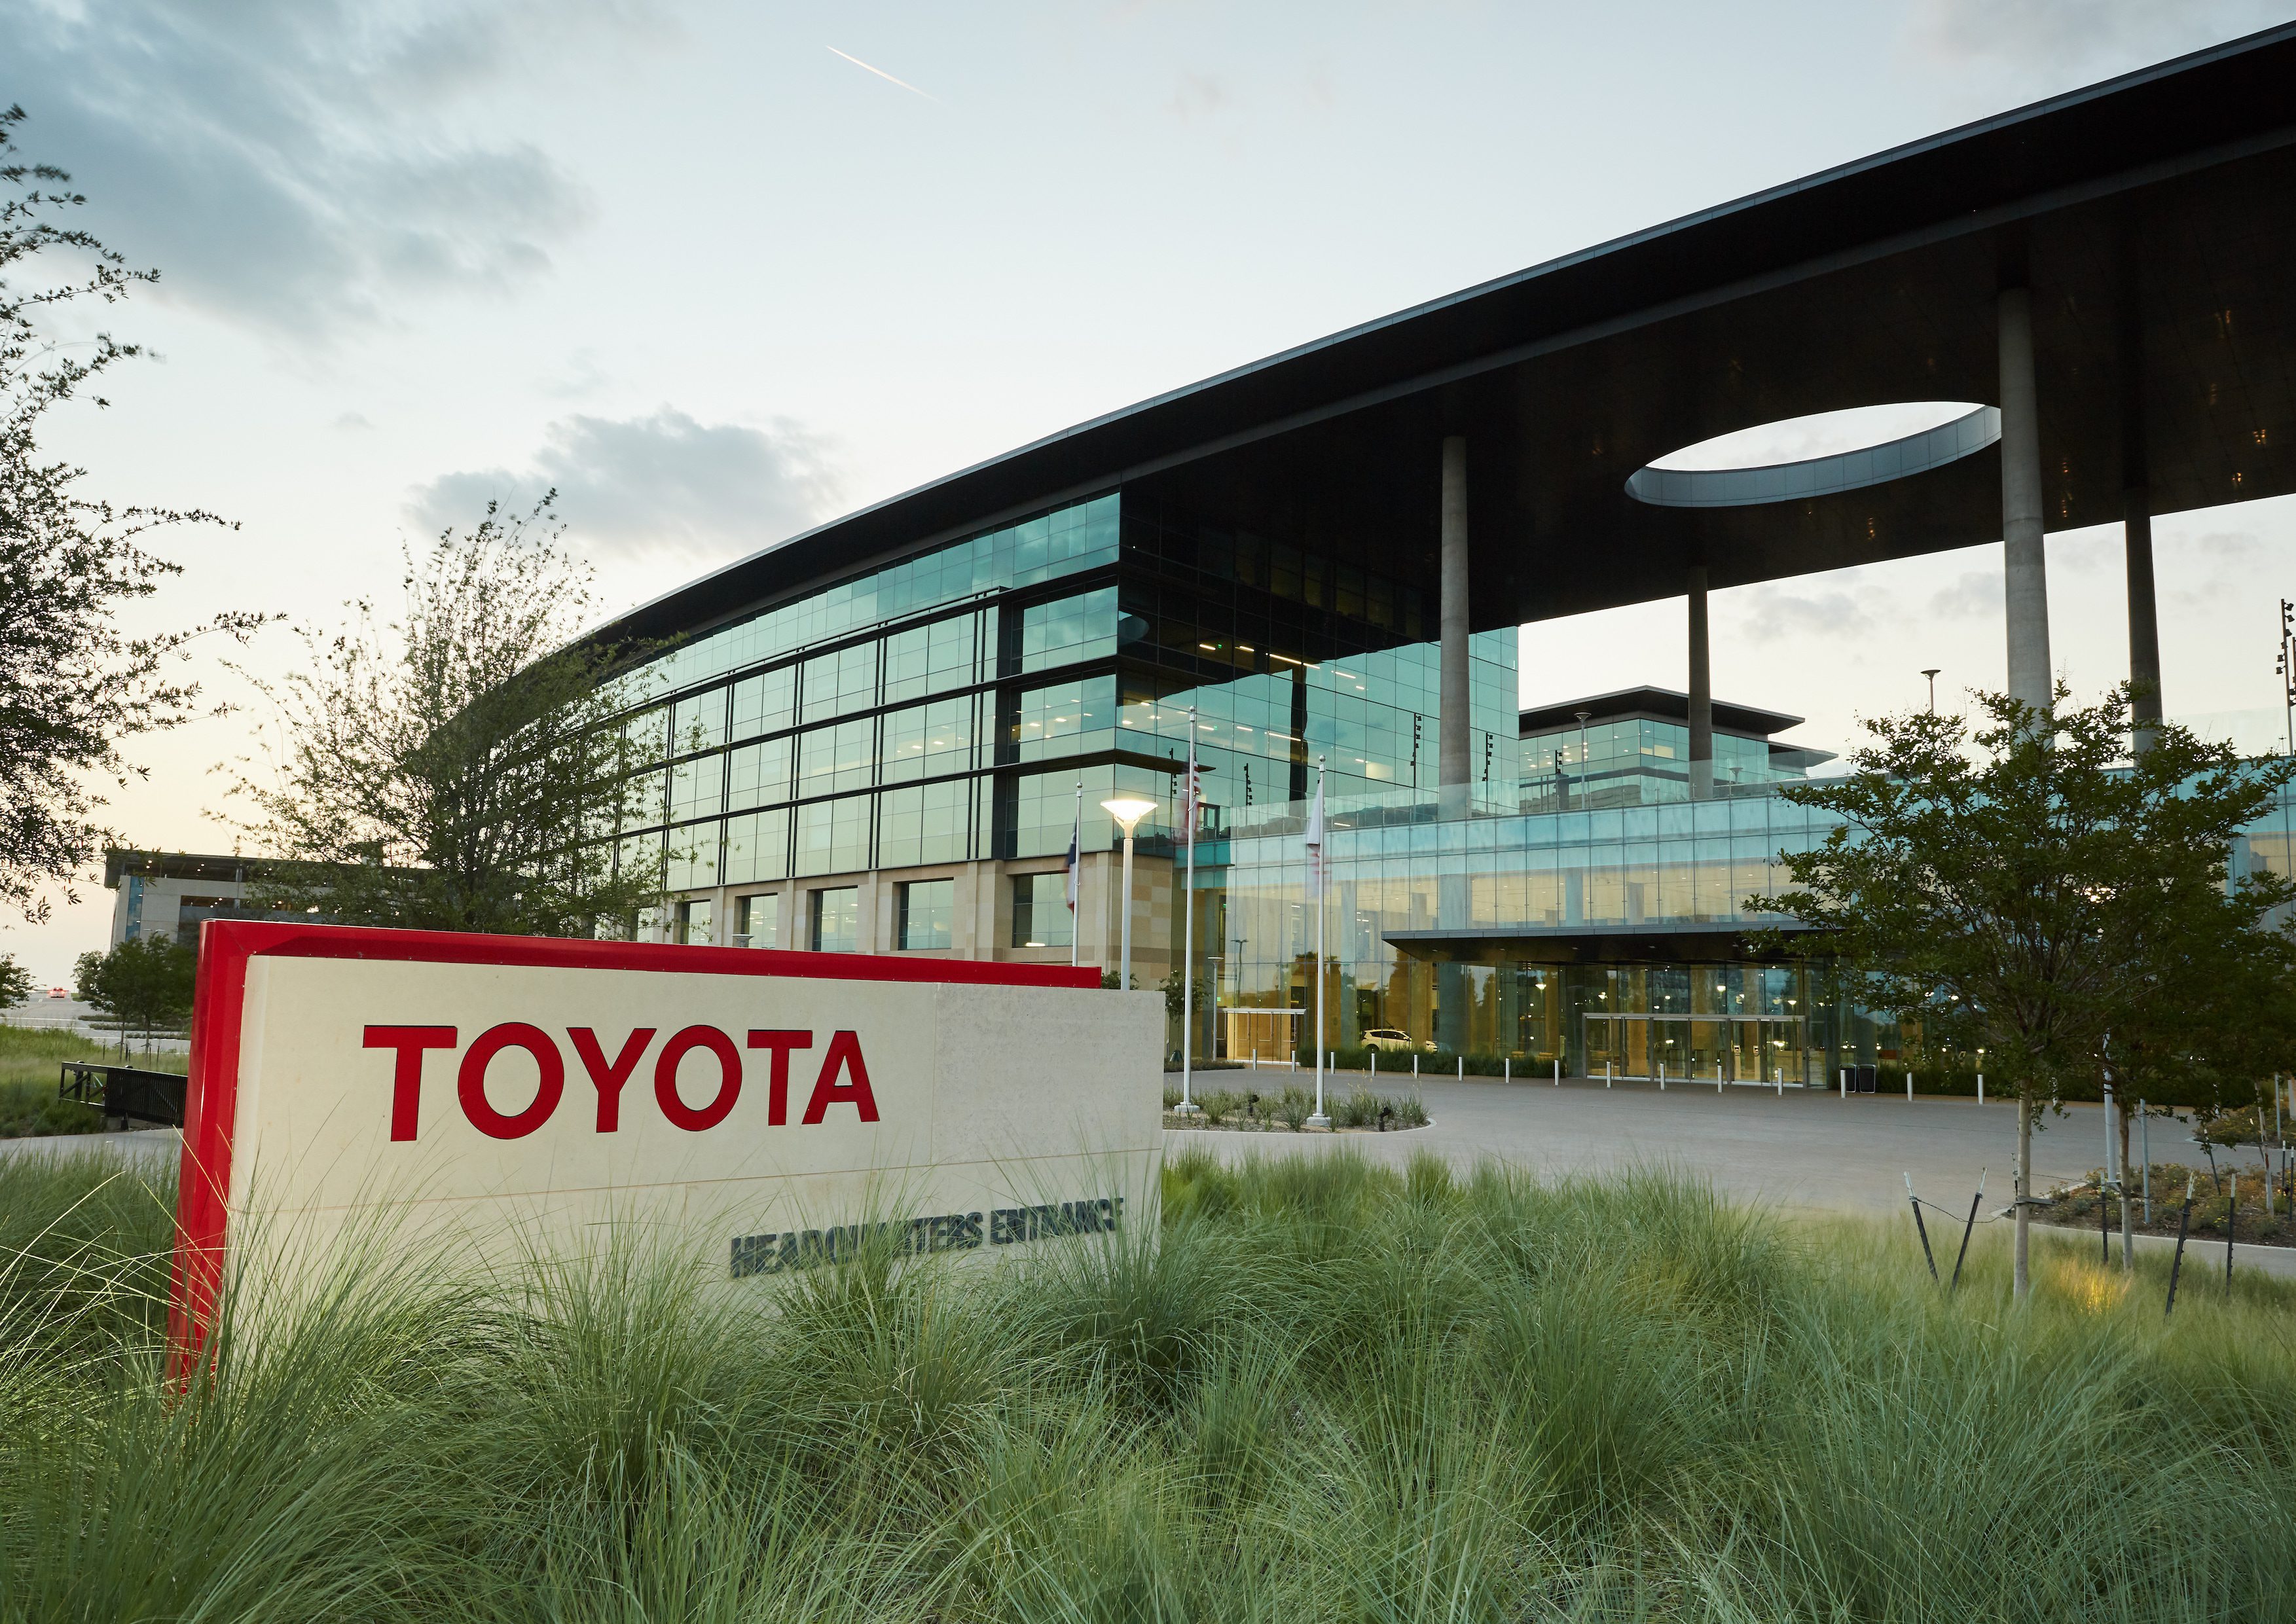 Toyota’s influence on U.S. manufacturing extends way beyond its own operations—because of the Toyota Production System. Here's why it's so powerful.